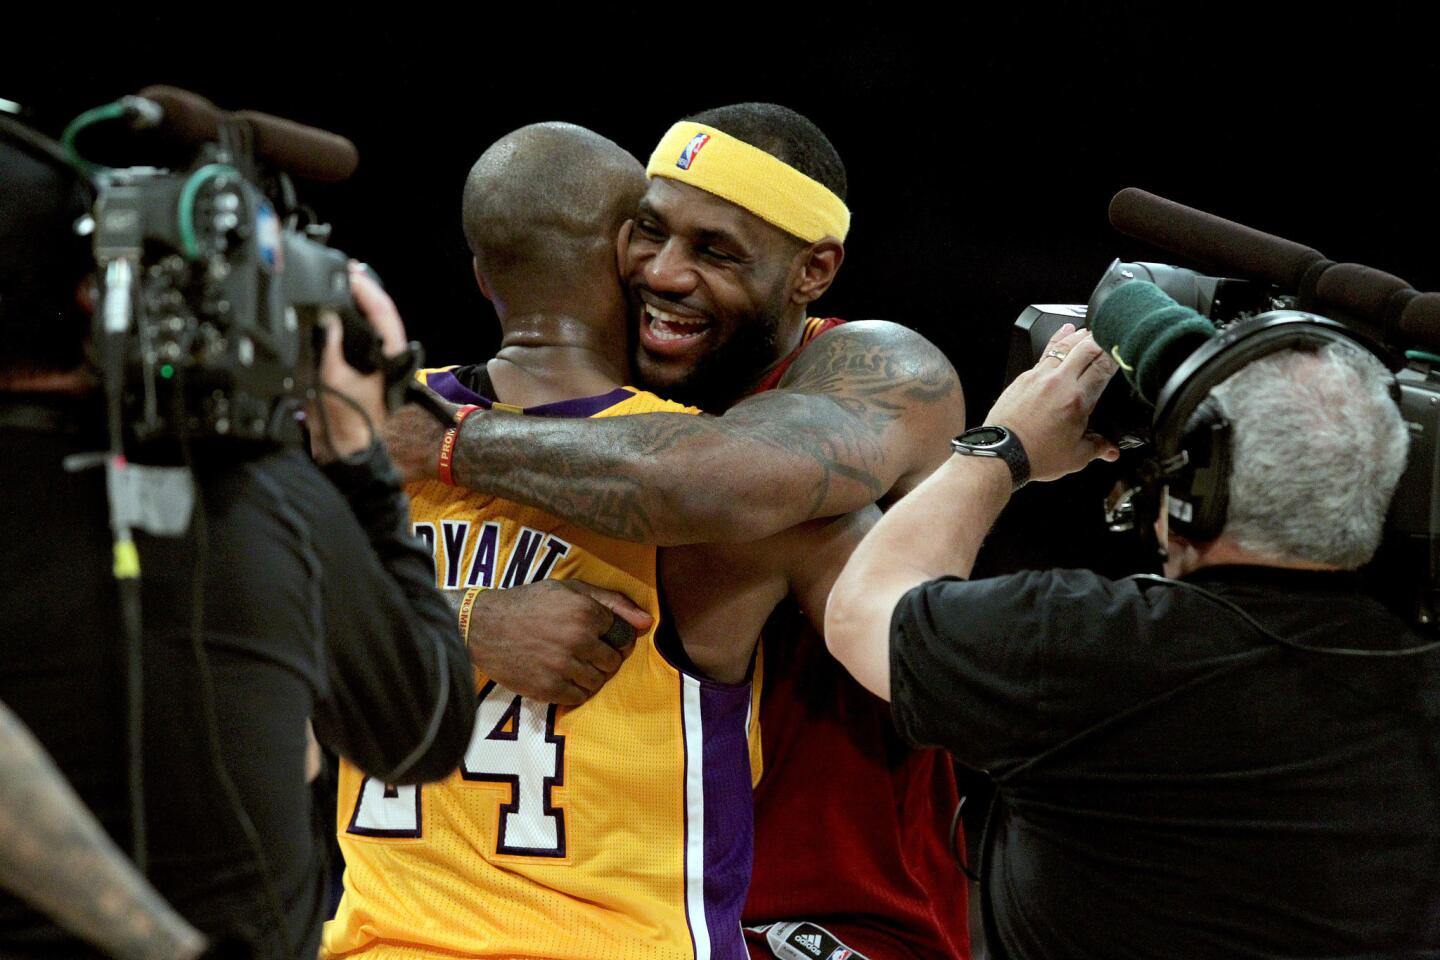 Lakers guard Kobe Bryant embraces Cavaliers forward LeBron James after their game Thursday night at Staples Center.